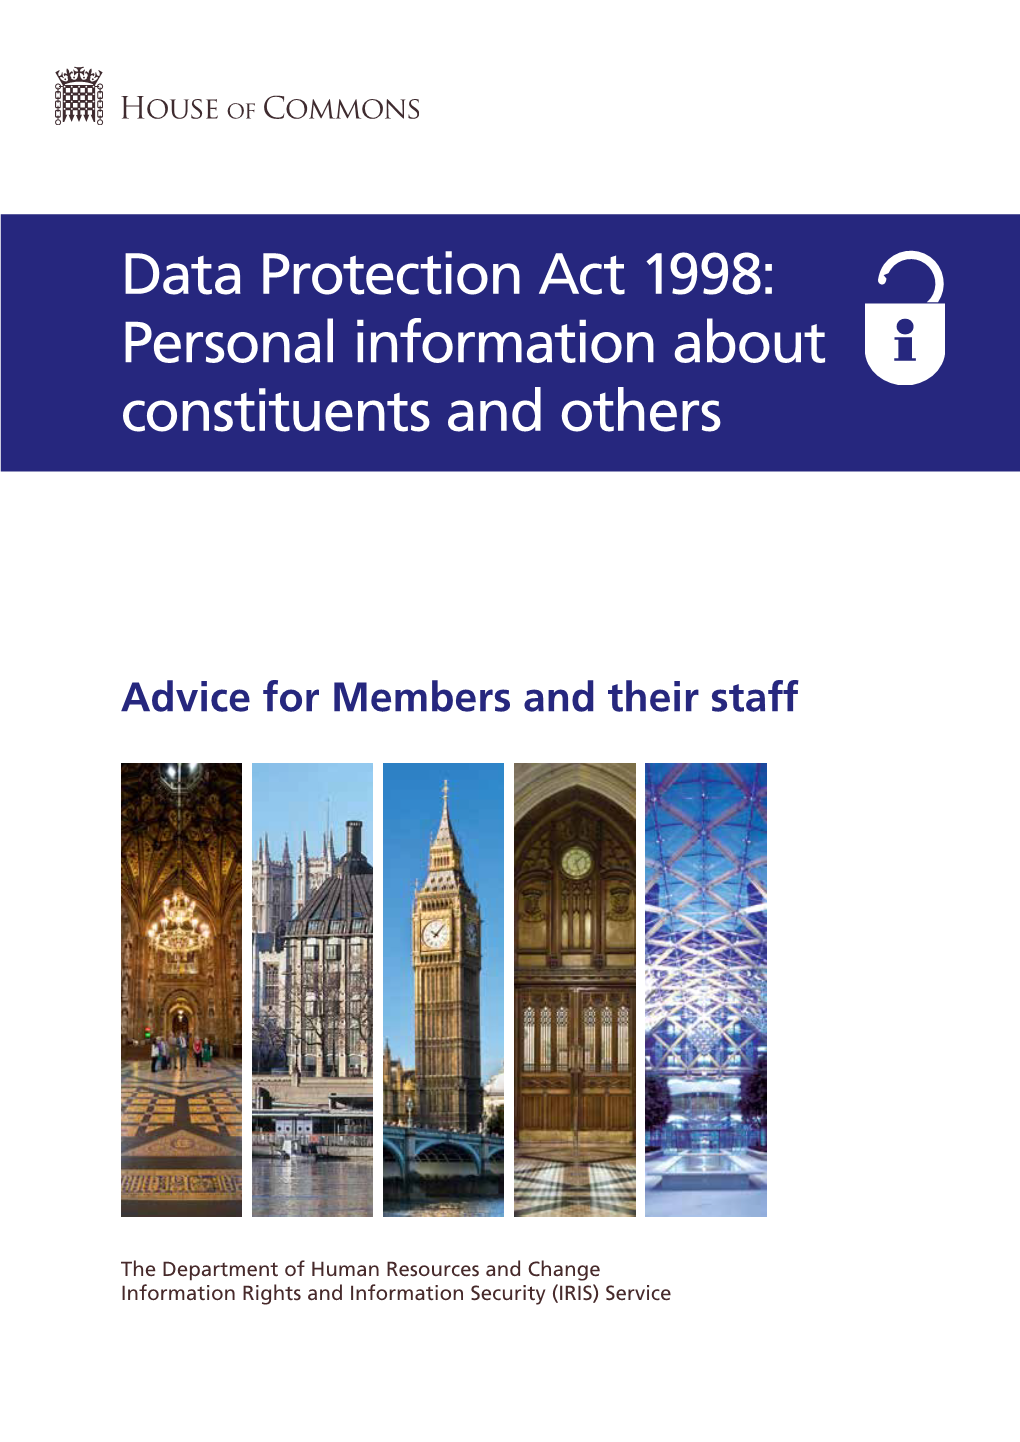 Data Protection Act 1998: Personal Information About Constituents and Others